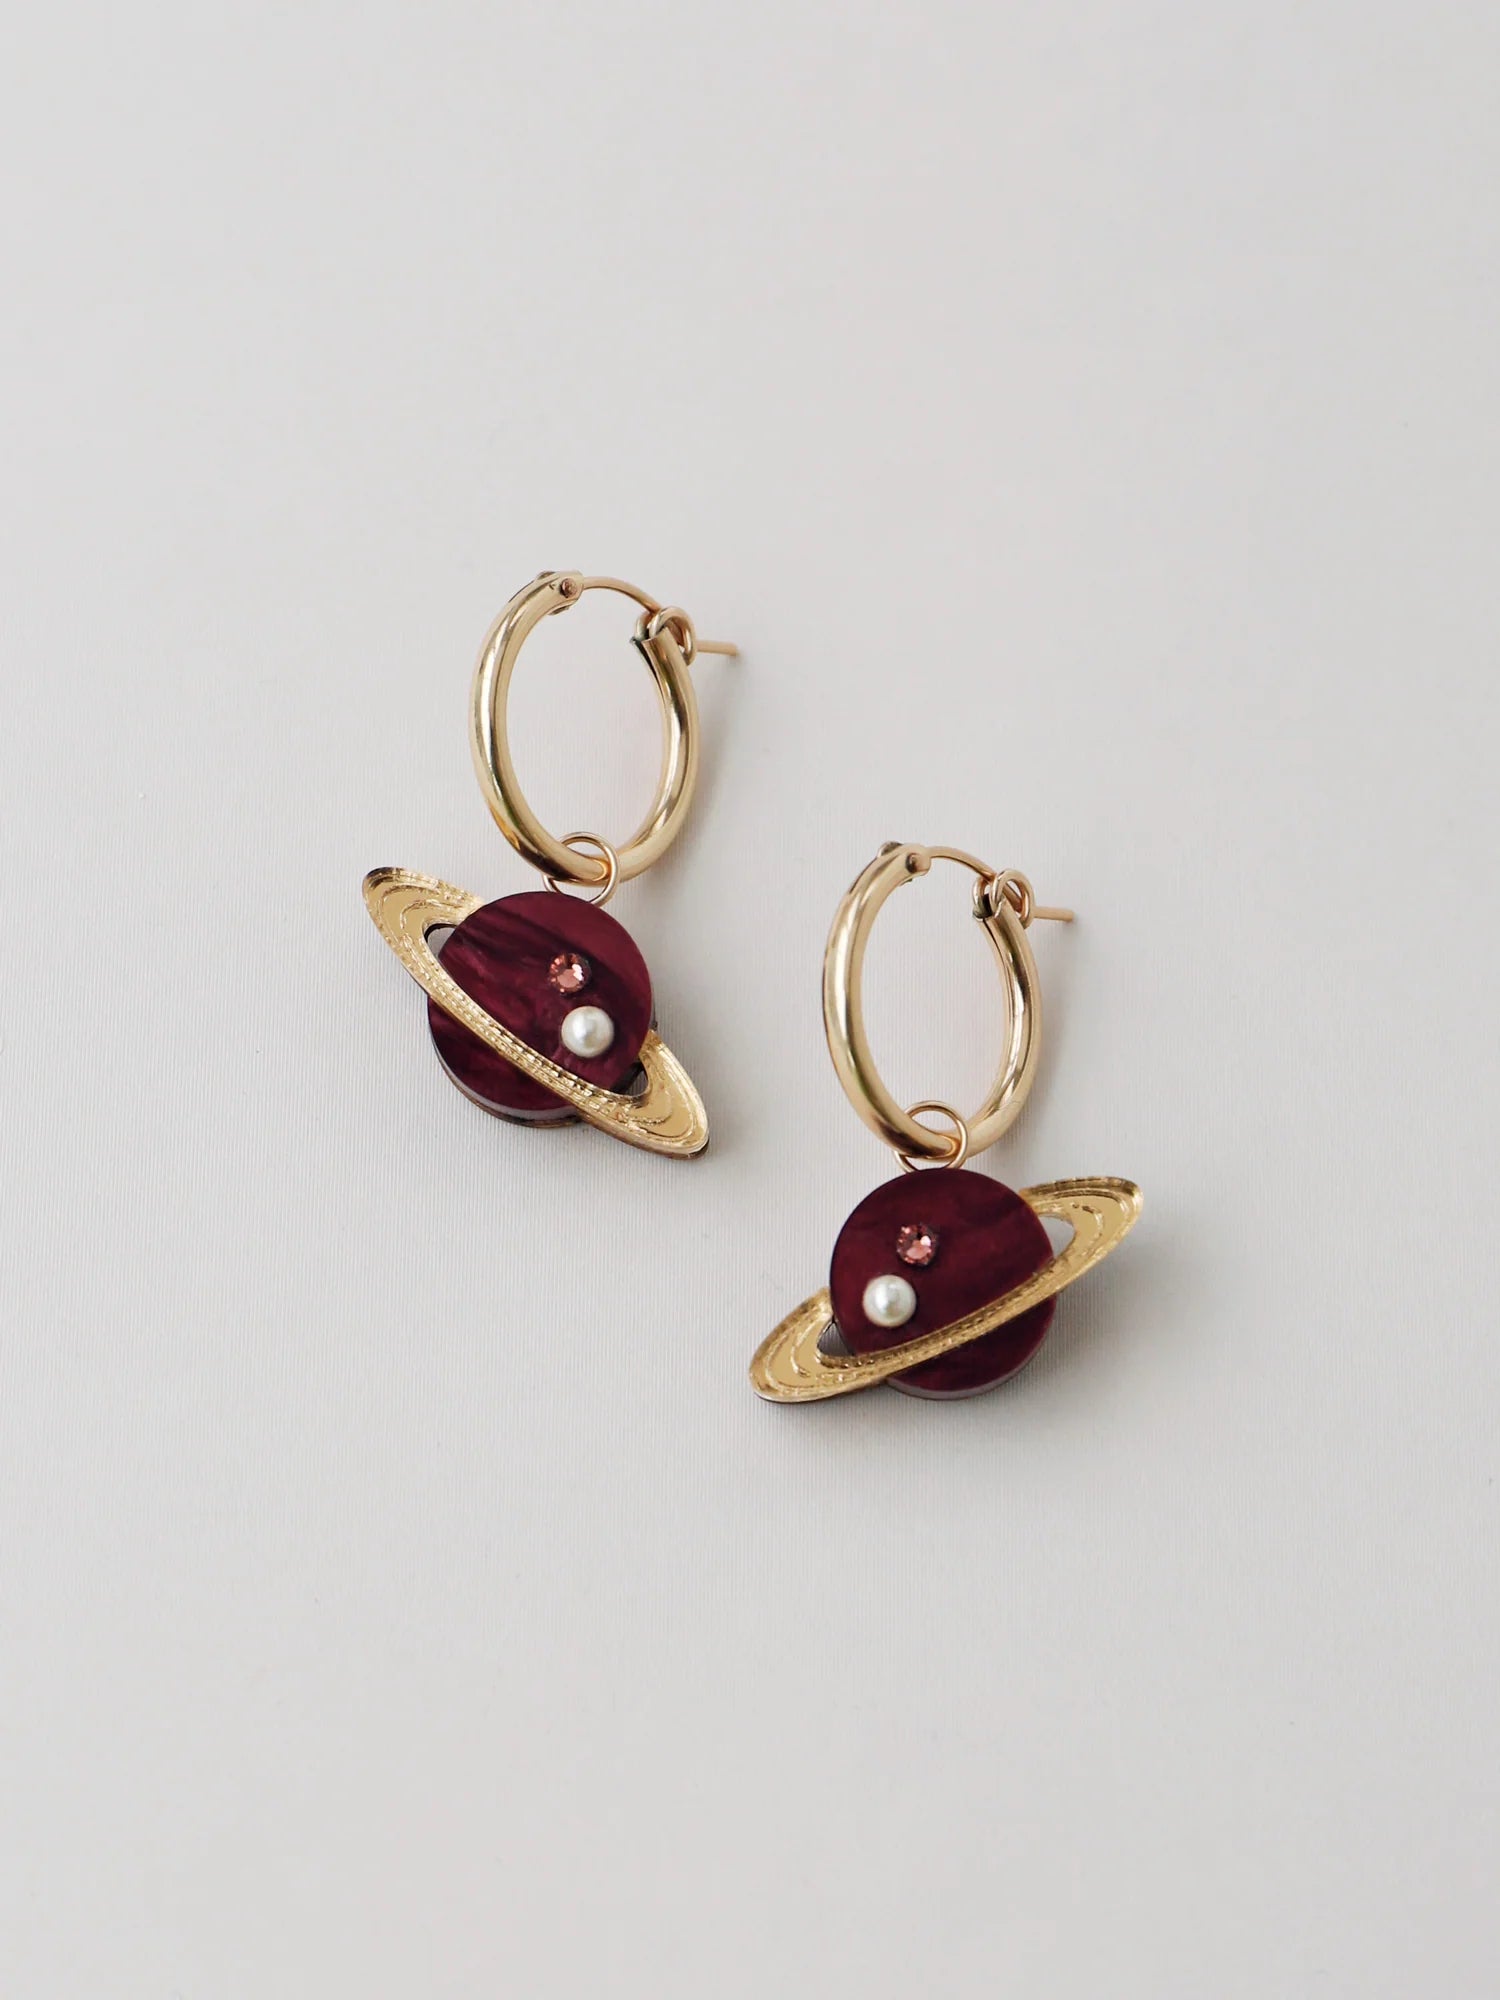 Saturn Hoops in Cherry by wolf and moon